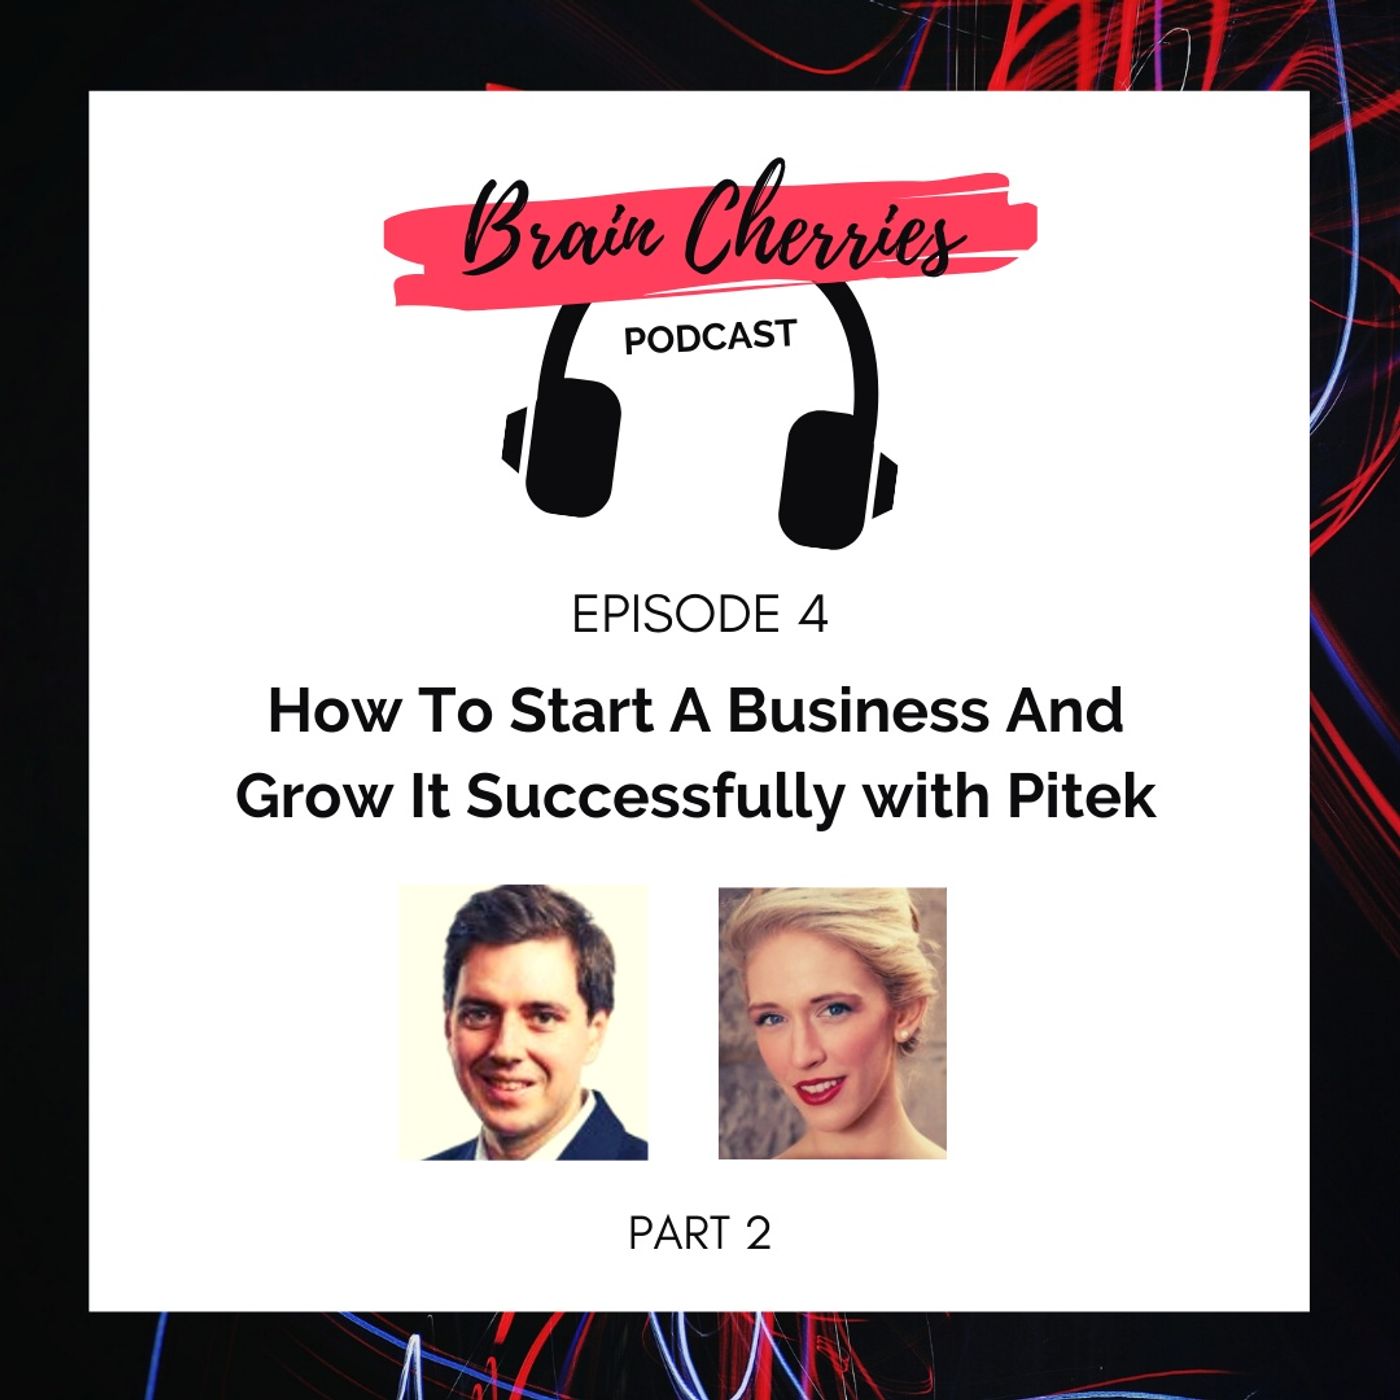 4. How To Start A Business And Grow It Successfully With Pitek - Part 2